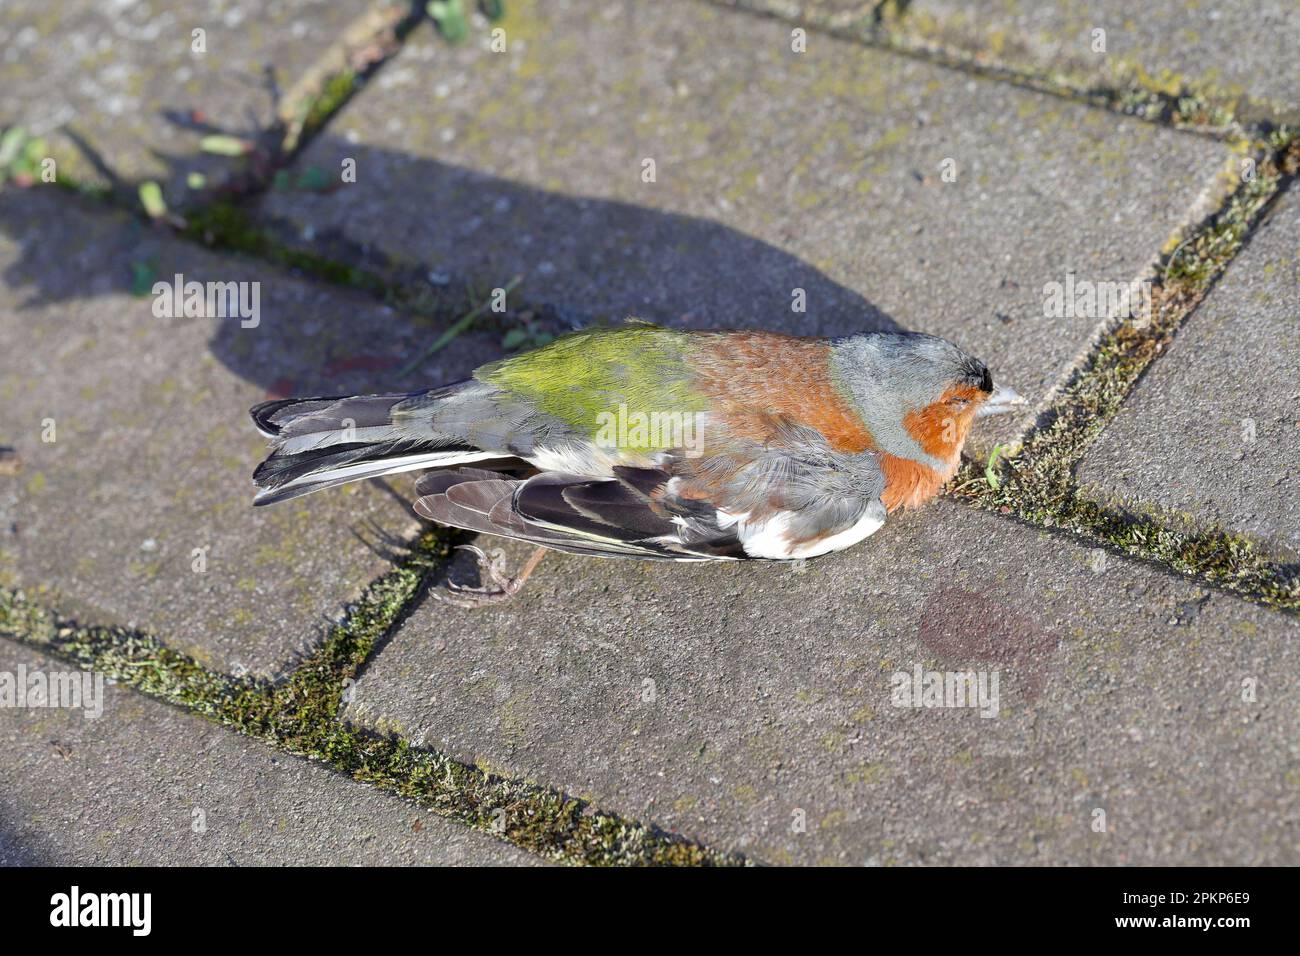 The common chaffinch or simply the chaffinch (Fringilla coelebs). A dead bird lying on the sidewalk. Stock Photo